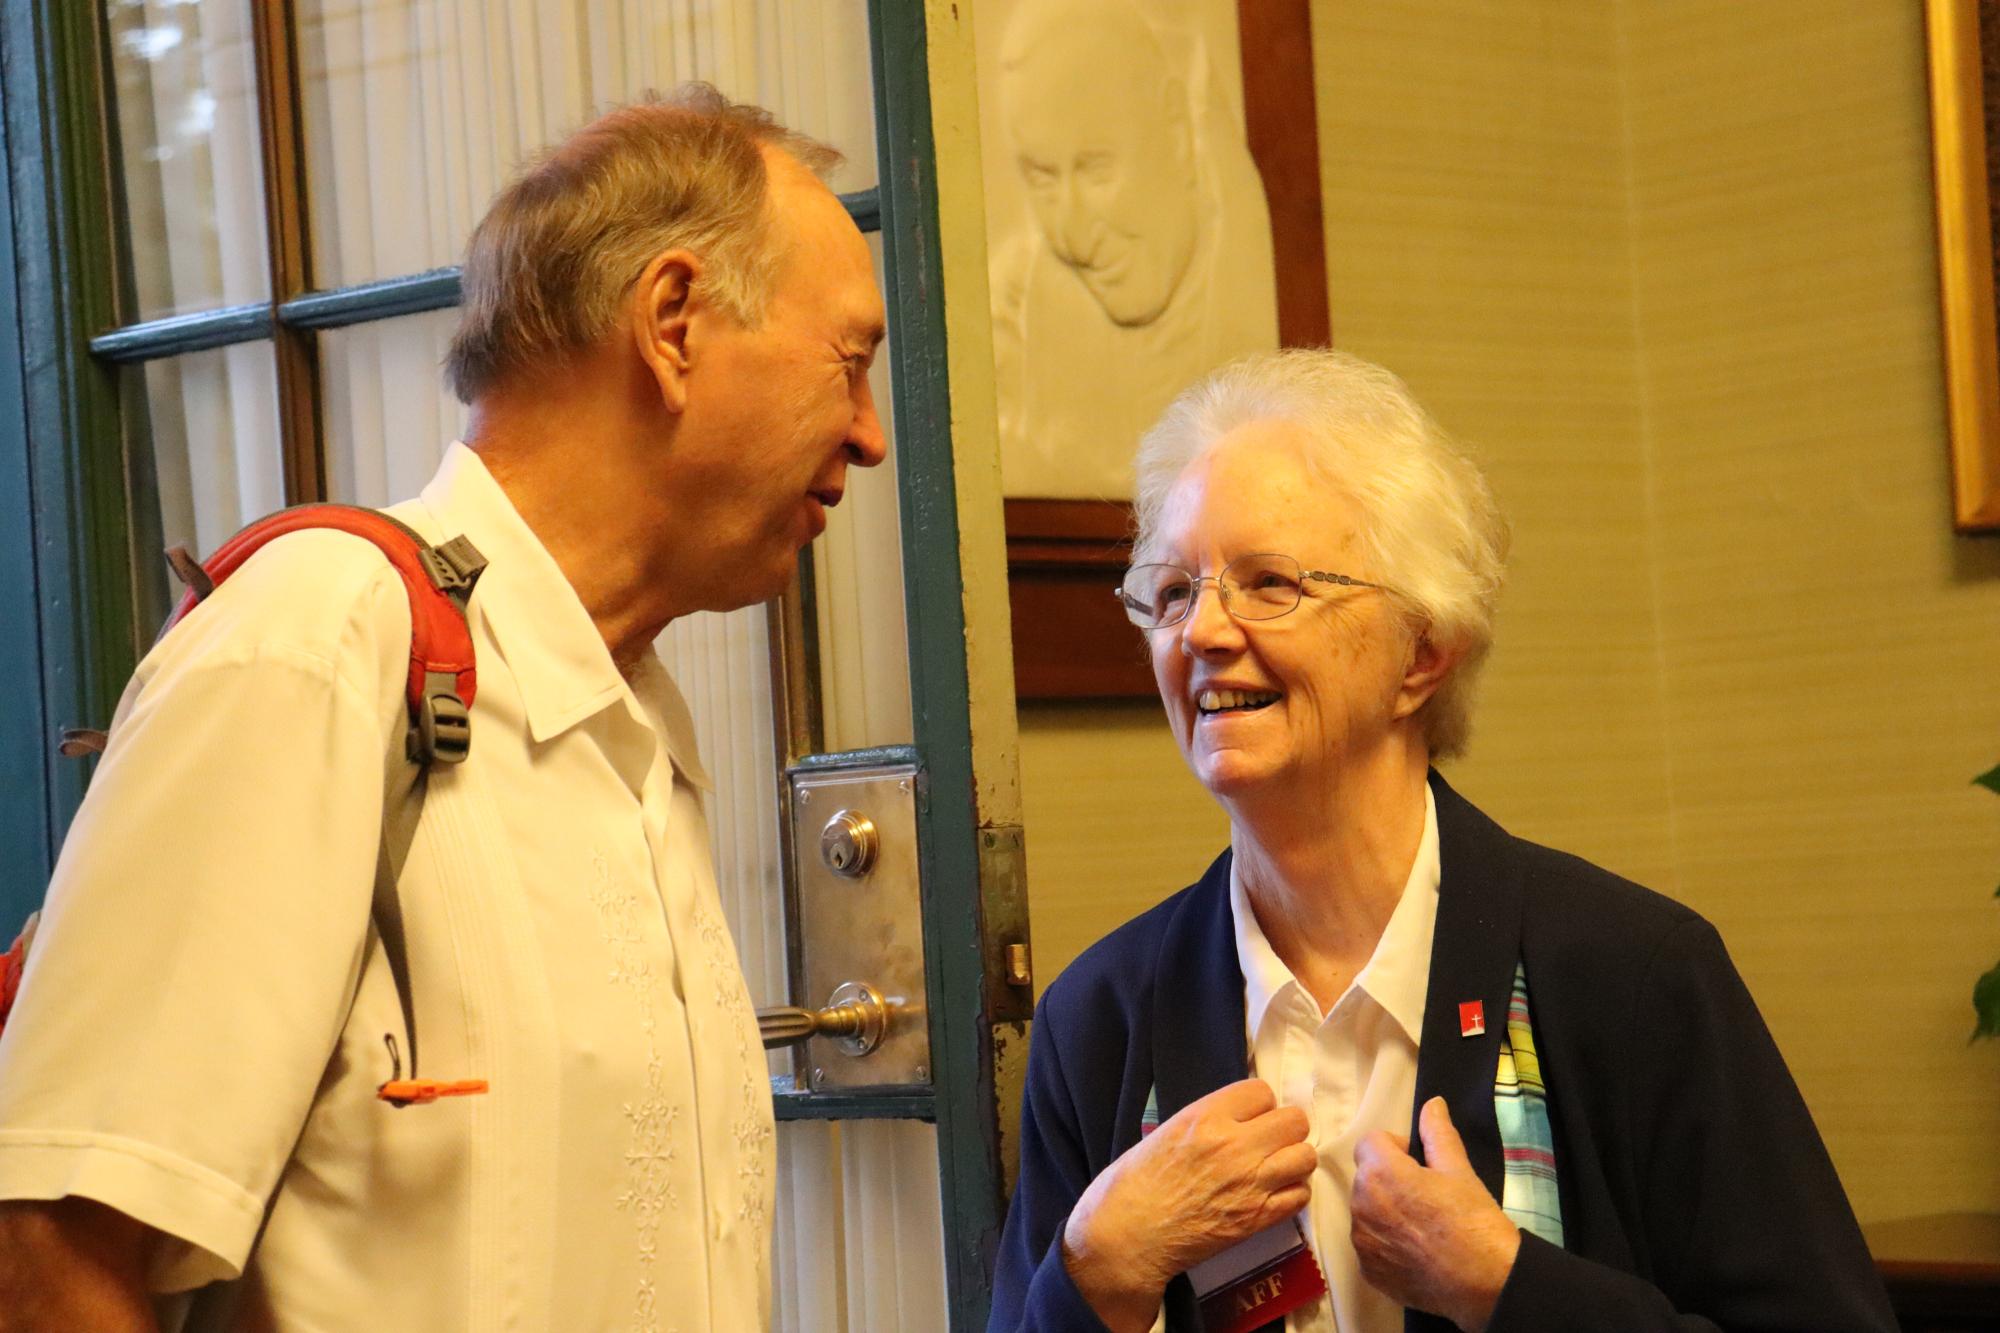 Sr. Eileen Reilly greets guest at the door